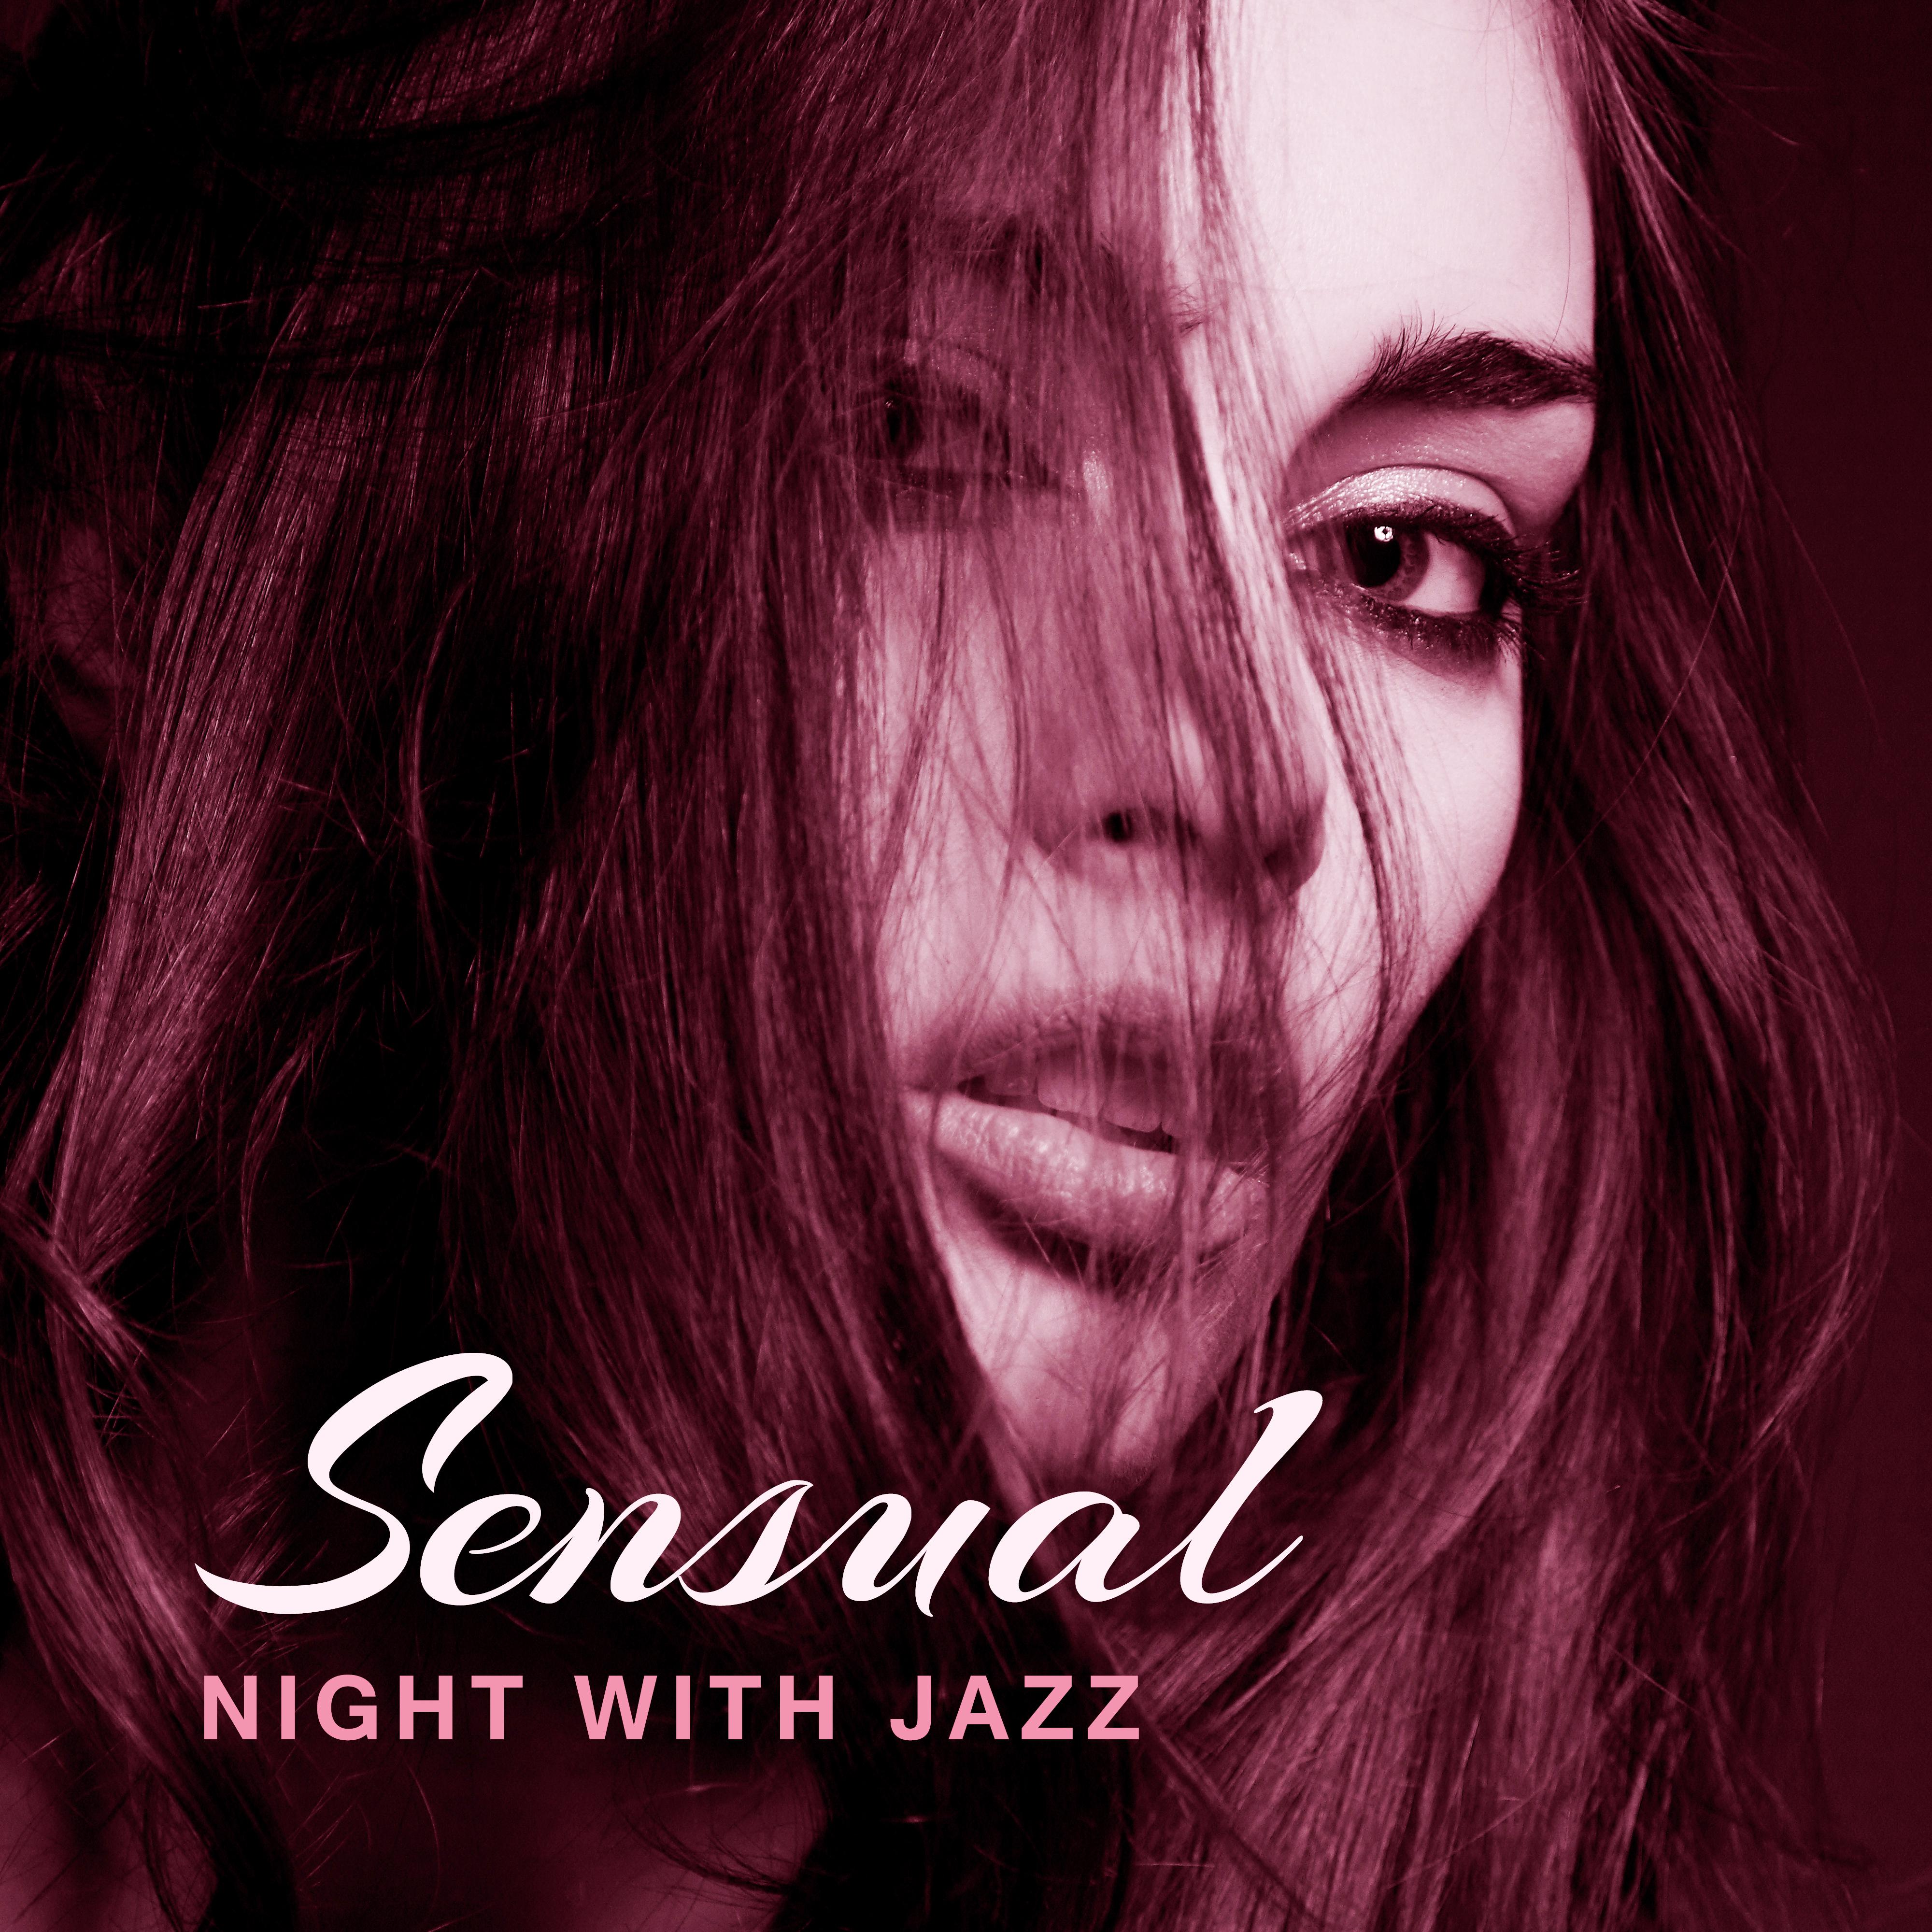 Sensual Night with Jazz  Romantic Dinner by Candlelight, Relaxing Jazz for Two, Erotic Jazz, Making Love